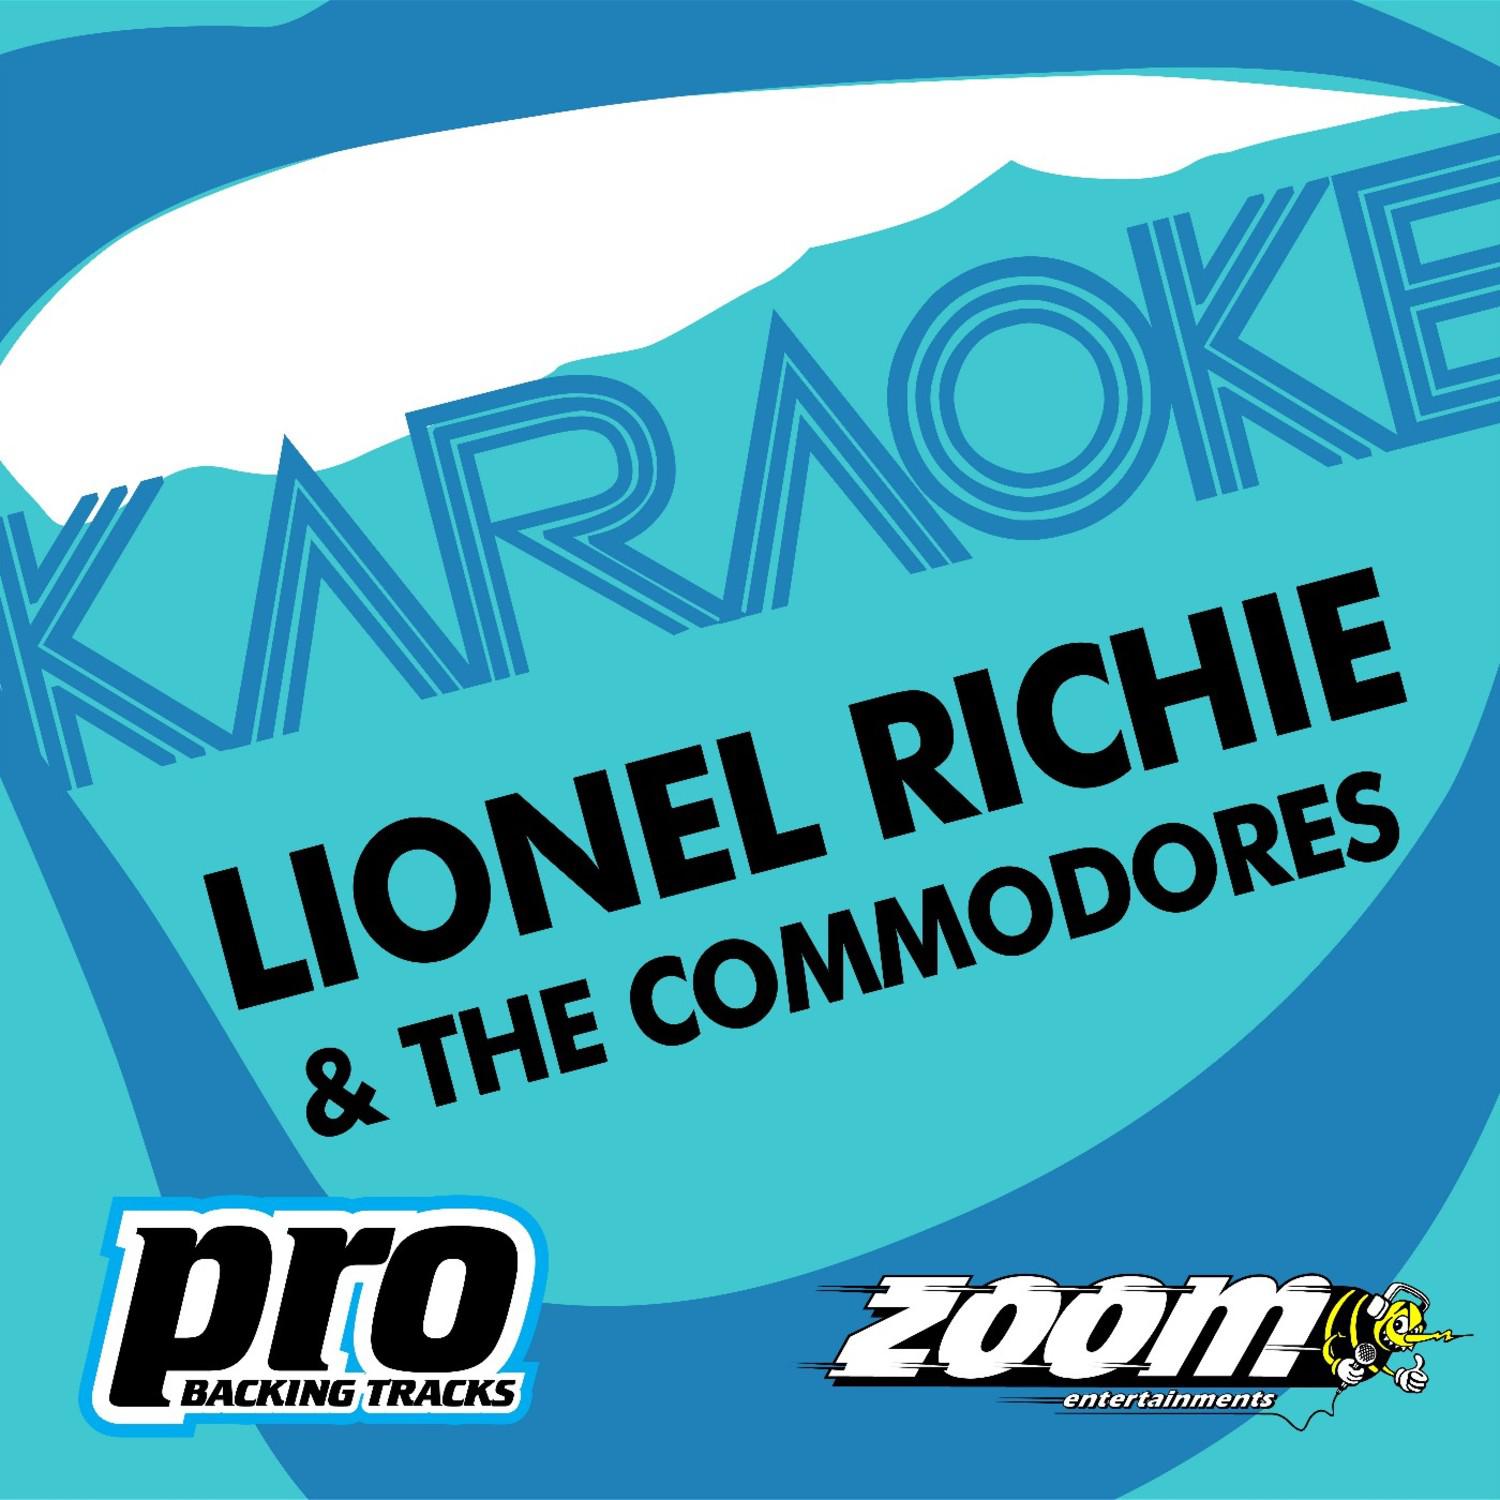 Zoom Karaoke - Lionel Richie & The Commodores